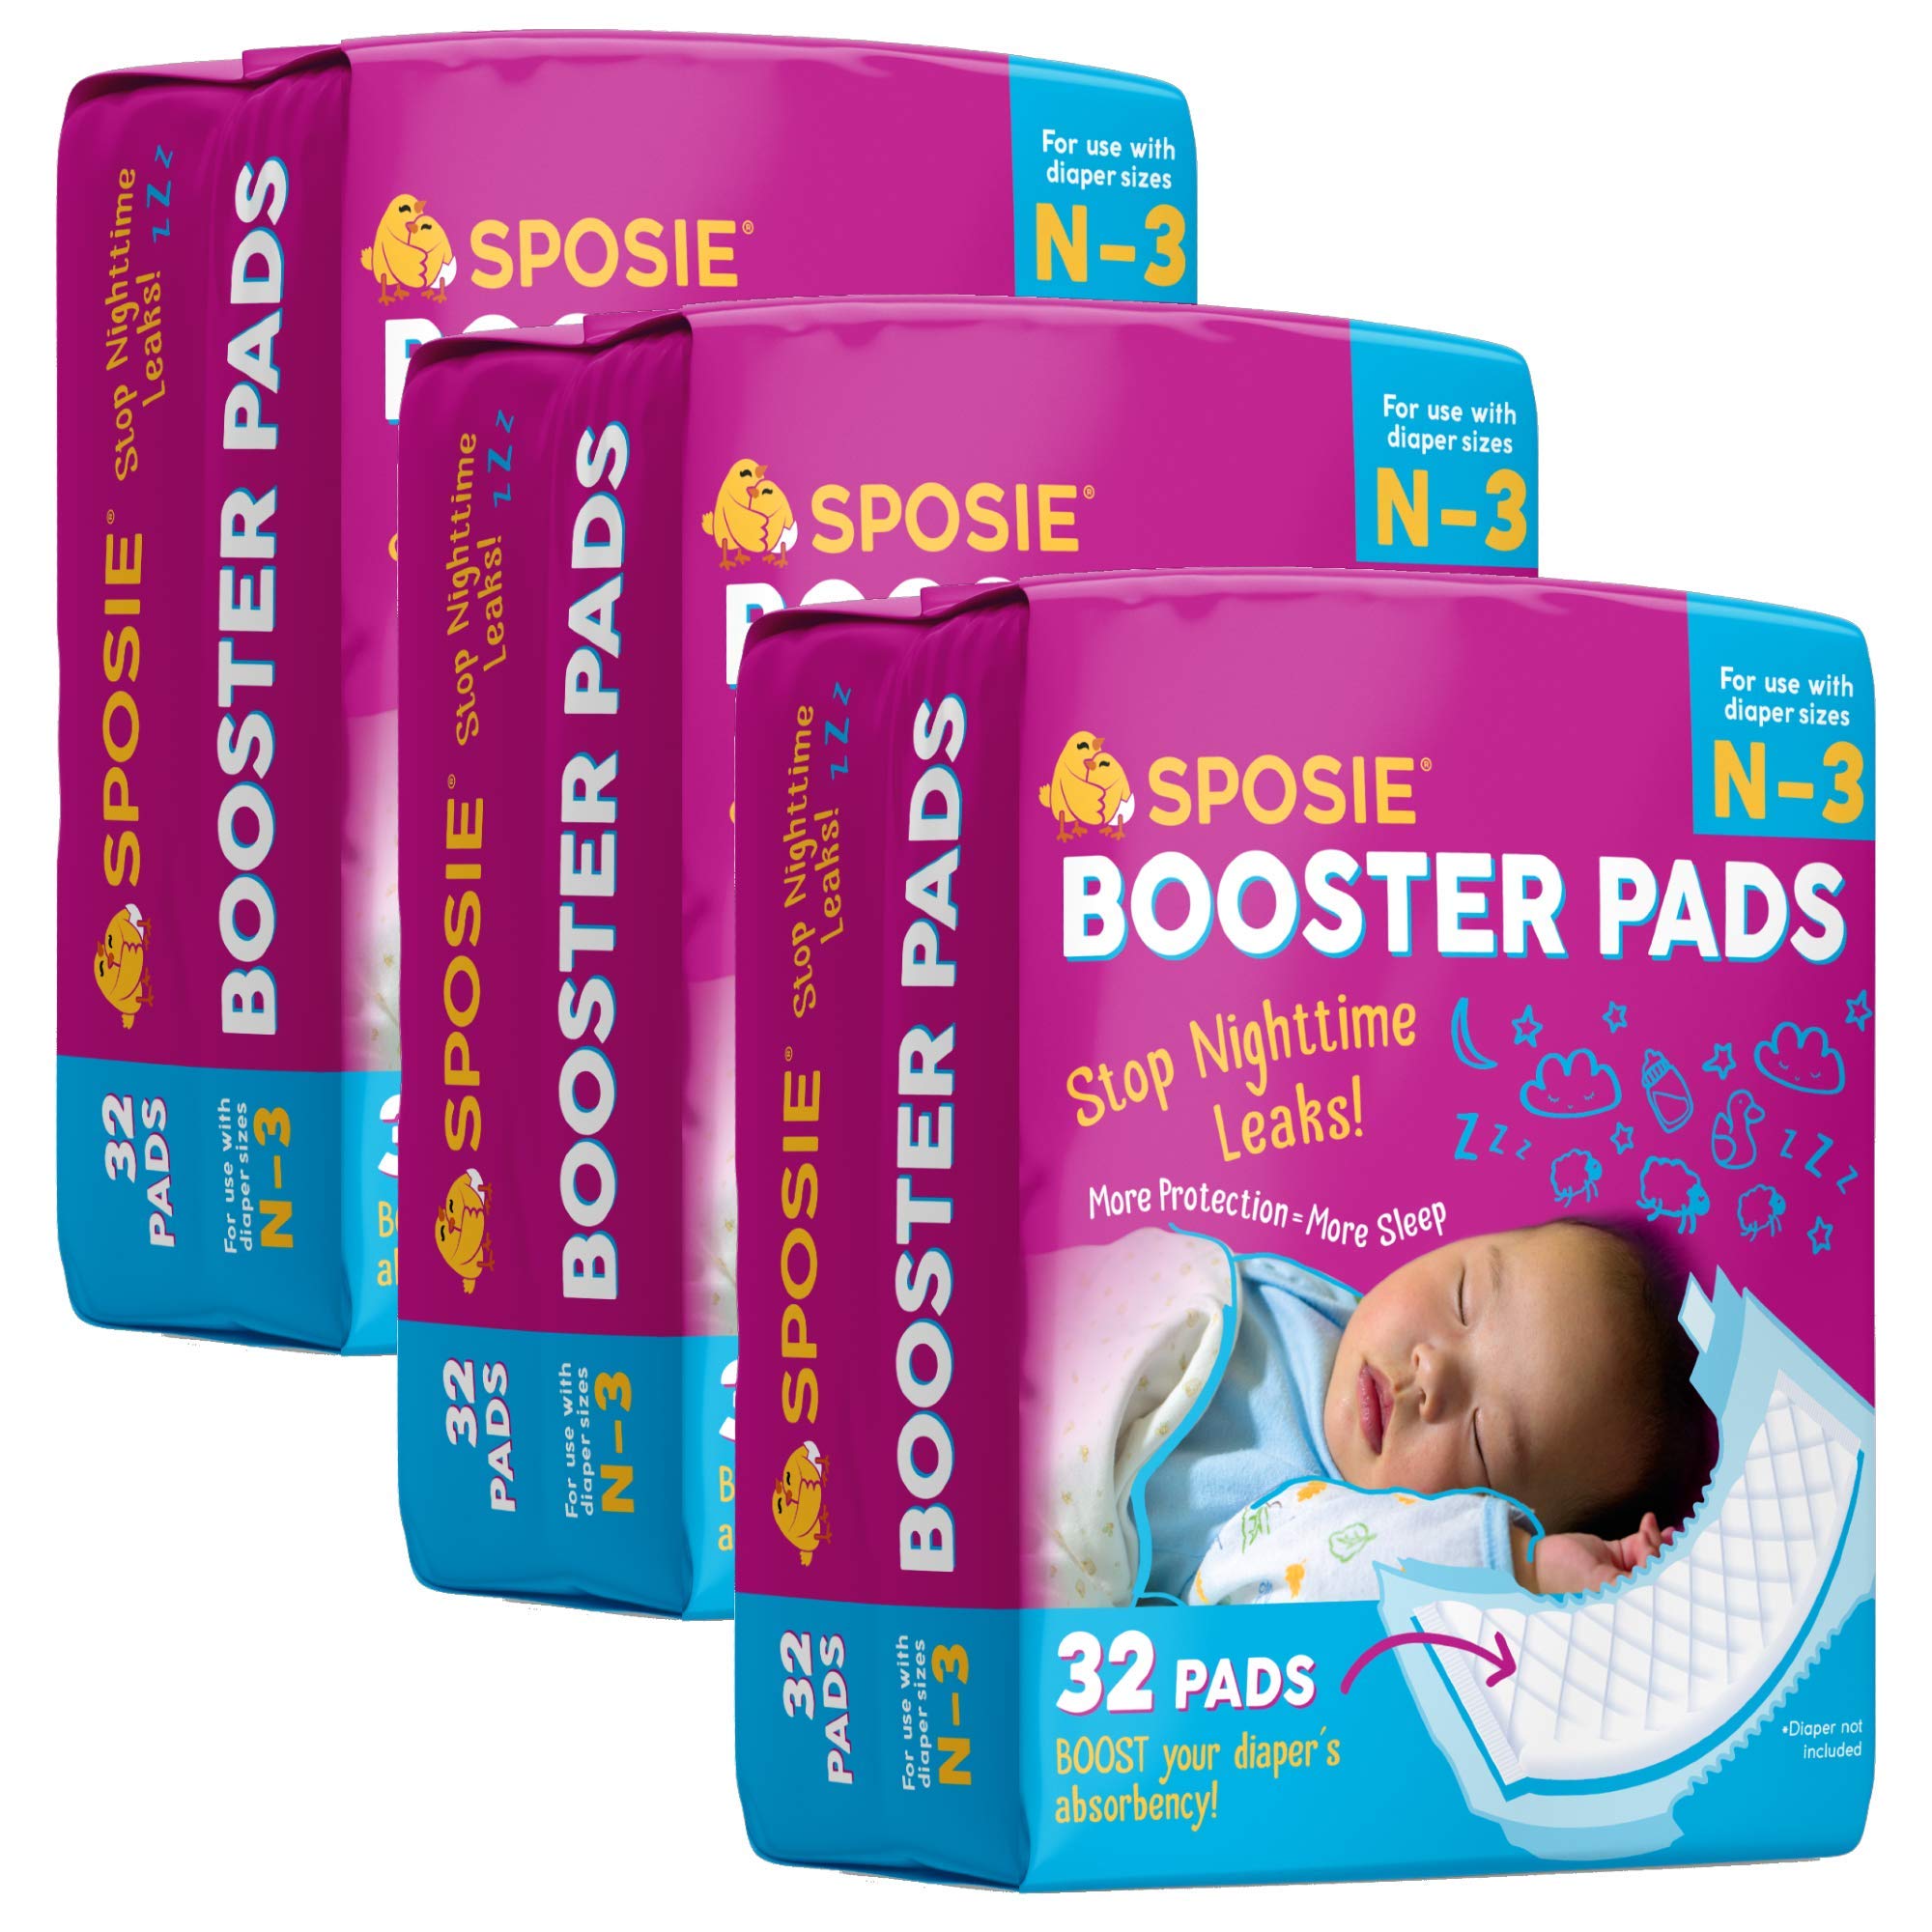 Sposie Diaper Booster Pads N-3, 96 Count - Baby Diaper Pads Inserts Overnight, Diaper Liners for Nighttime Diapers, Overnight Diapers, Newborn Diapers